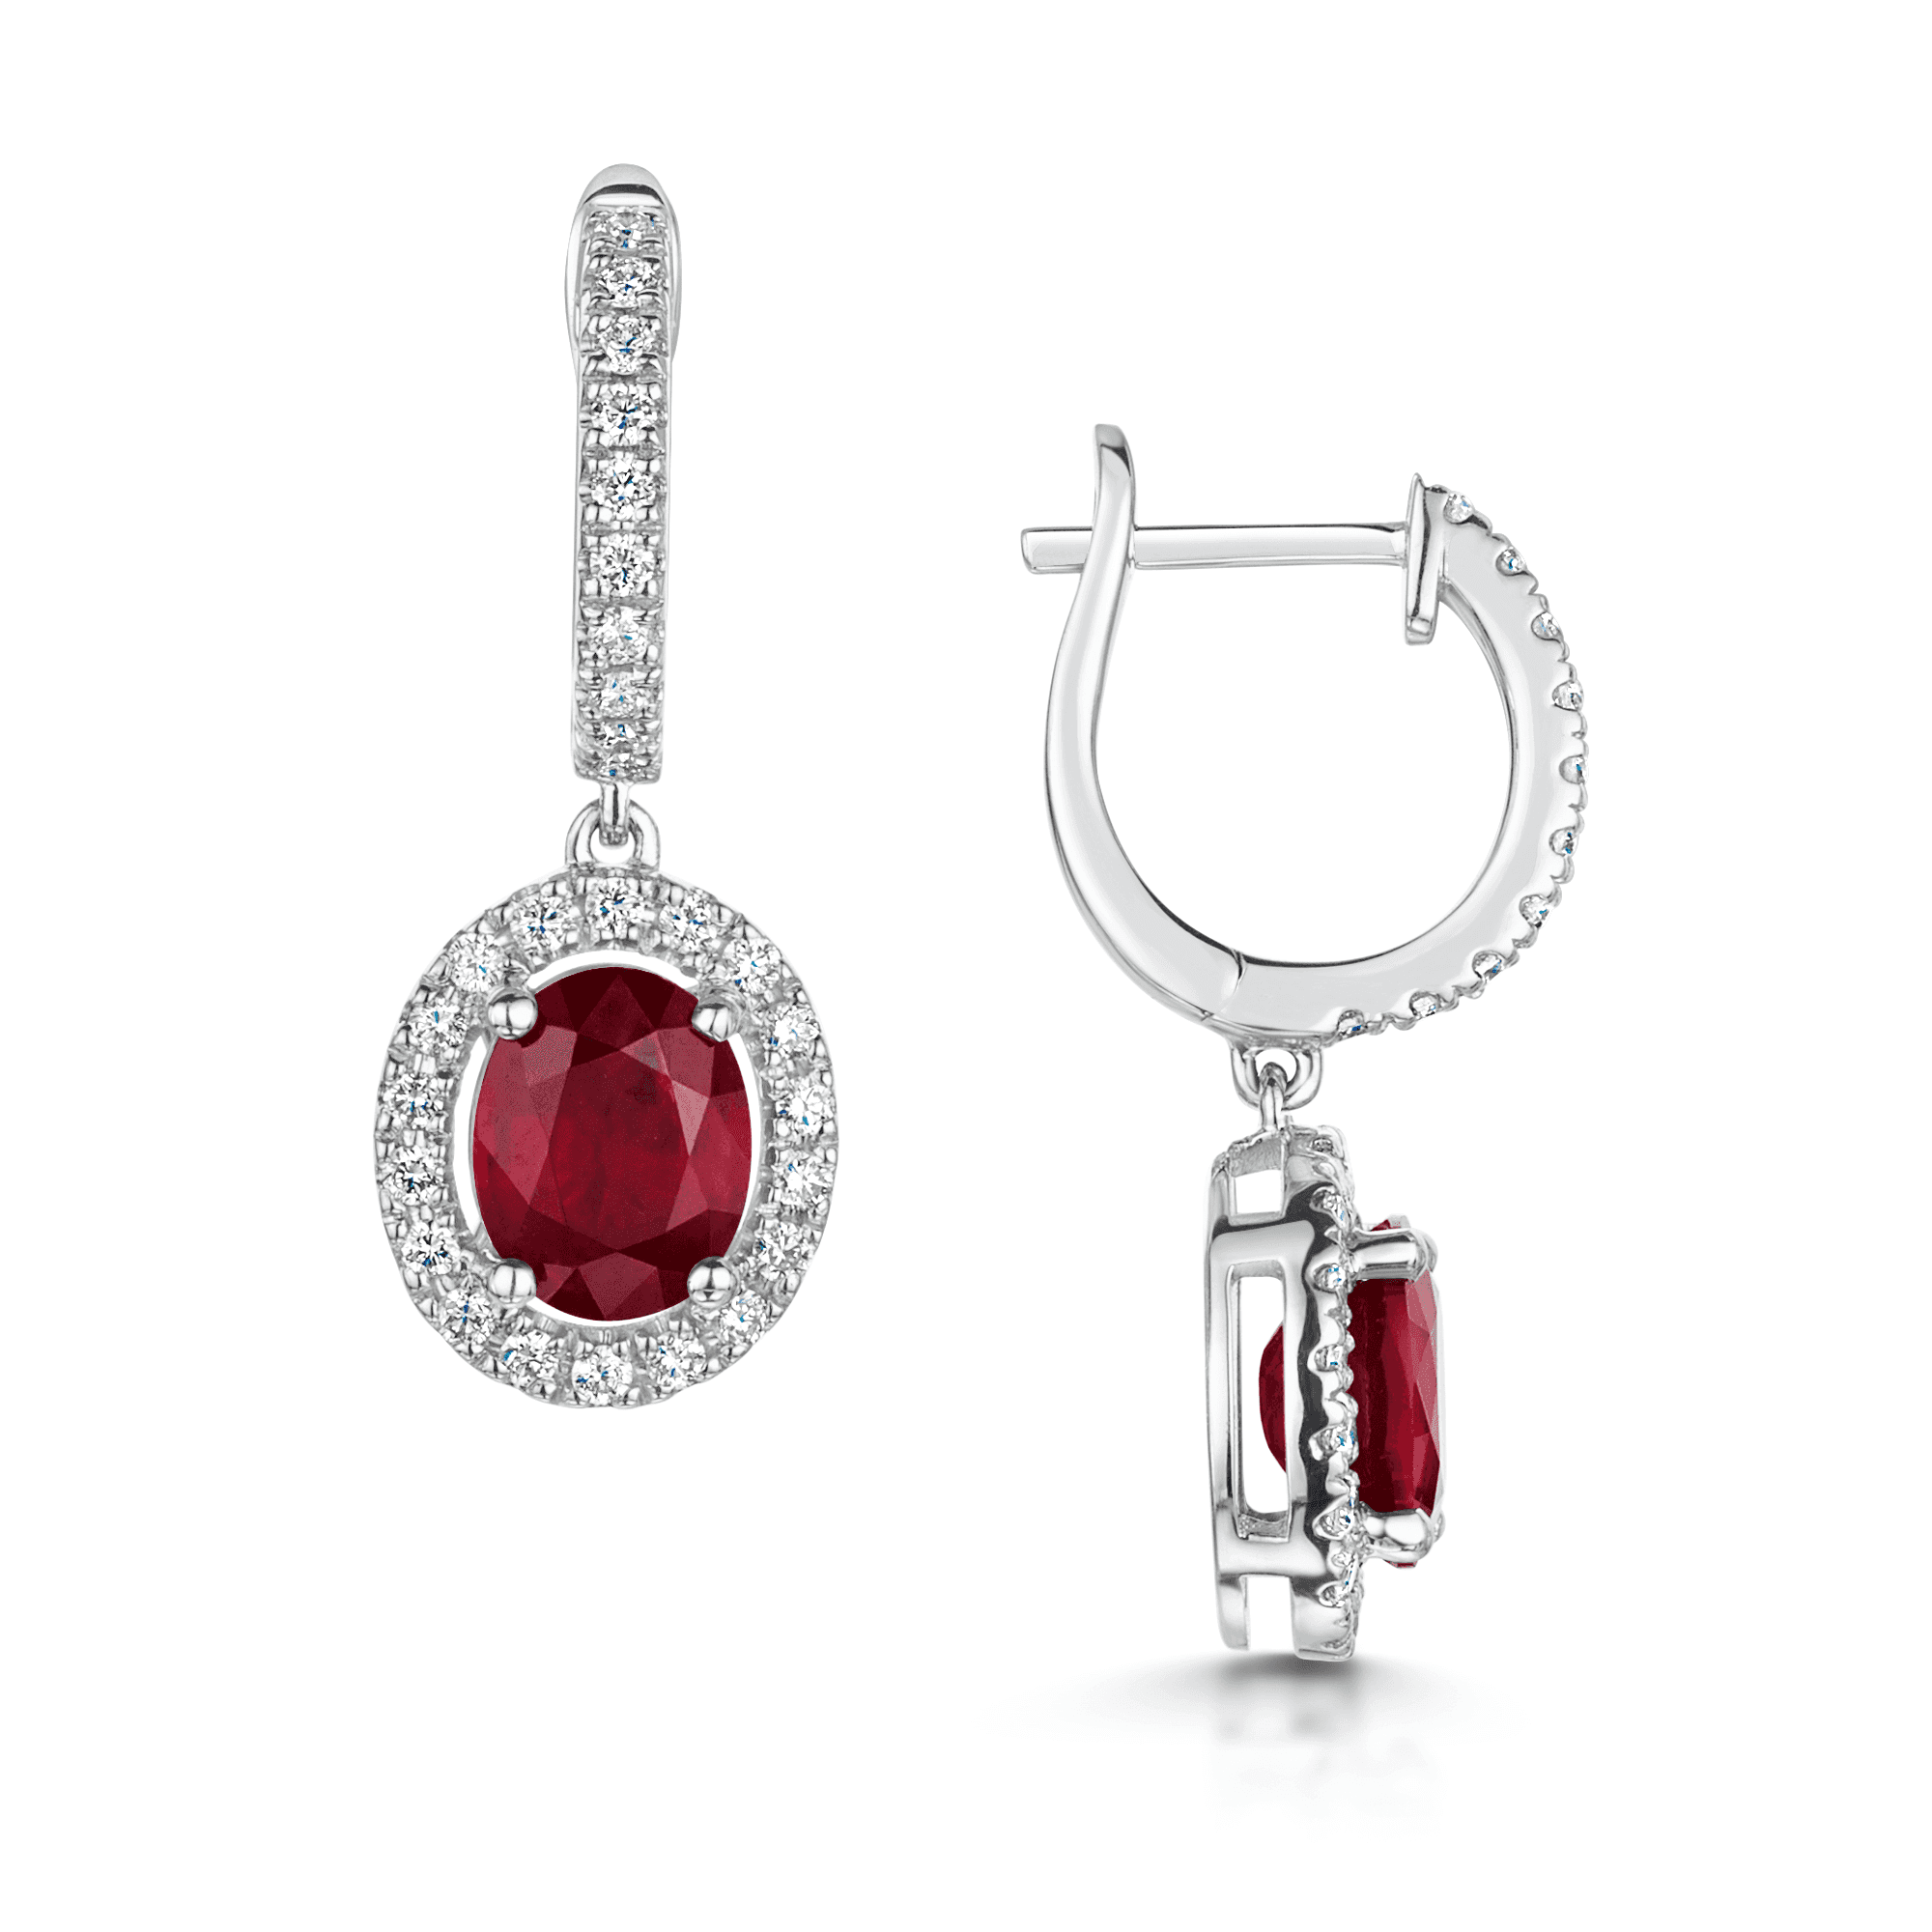 18ct White Gold Oval Ruby And Diamond Halo Surround With Diamond Hoops